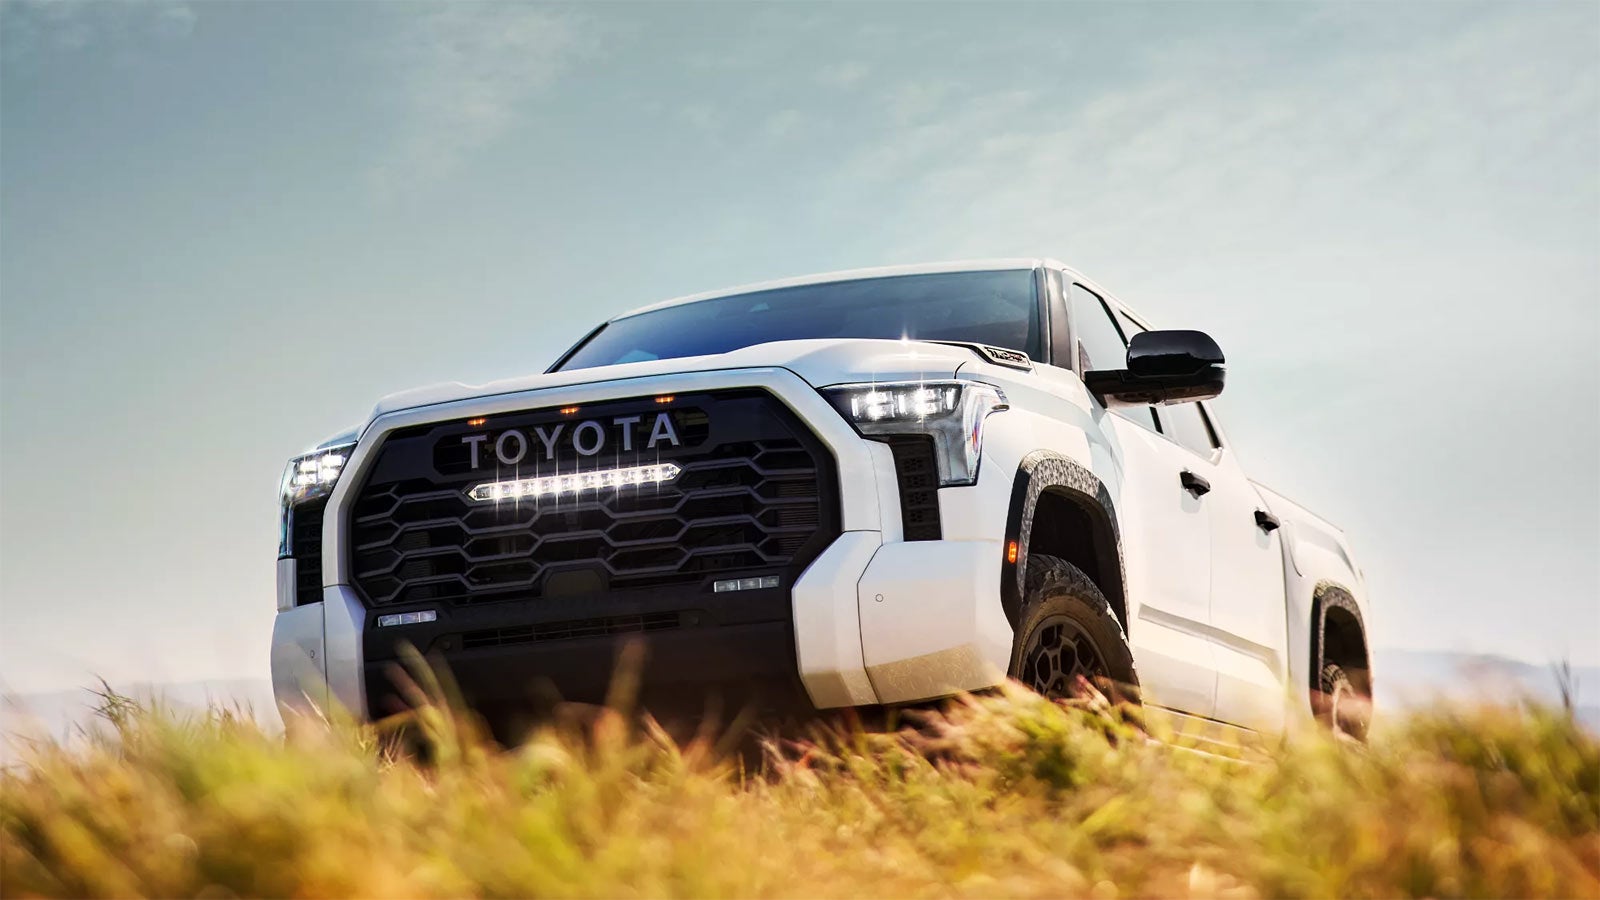 2022 Toyota Tundra Gallery | Baierl Toyota in Mars PA